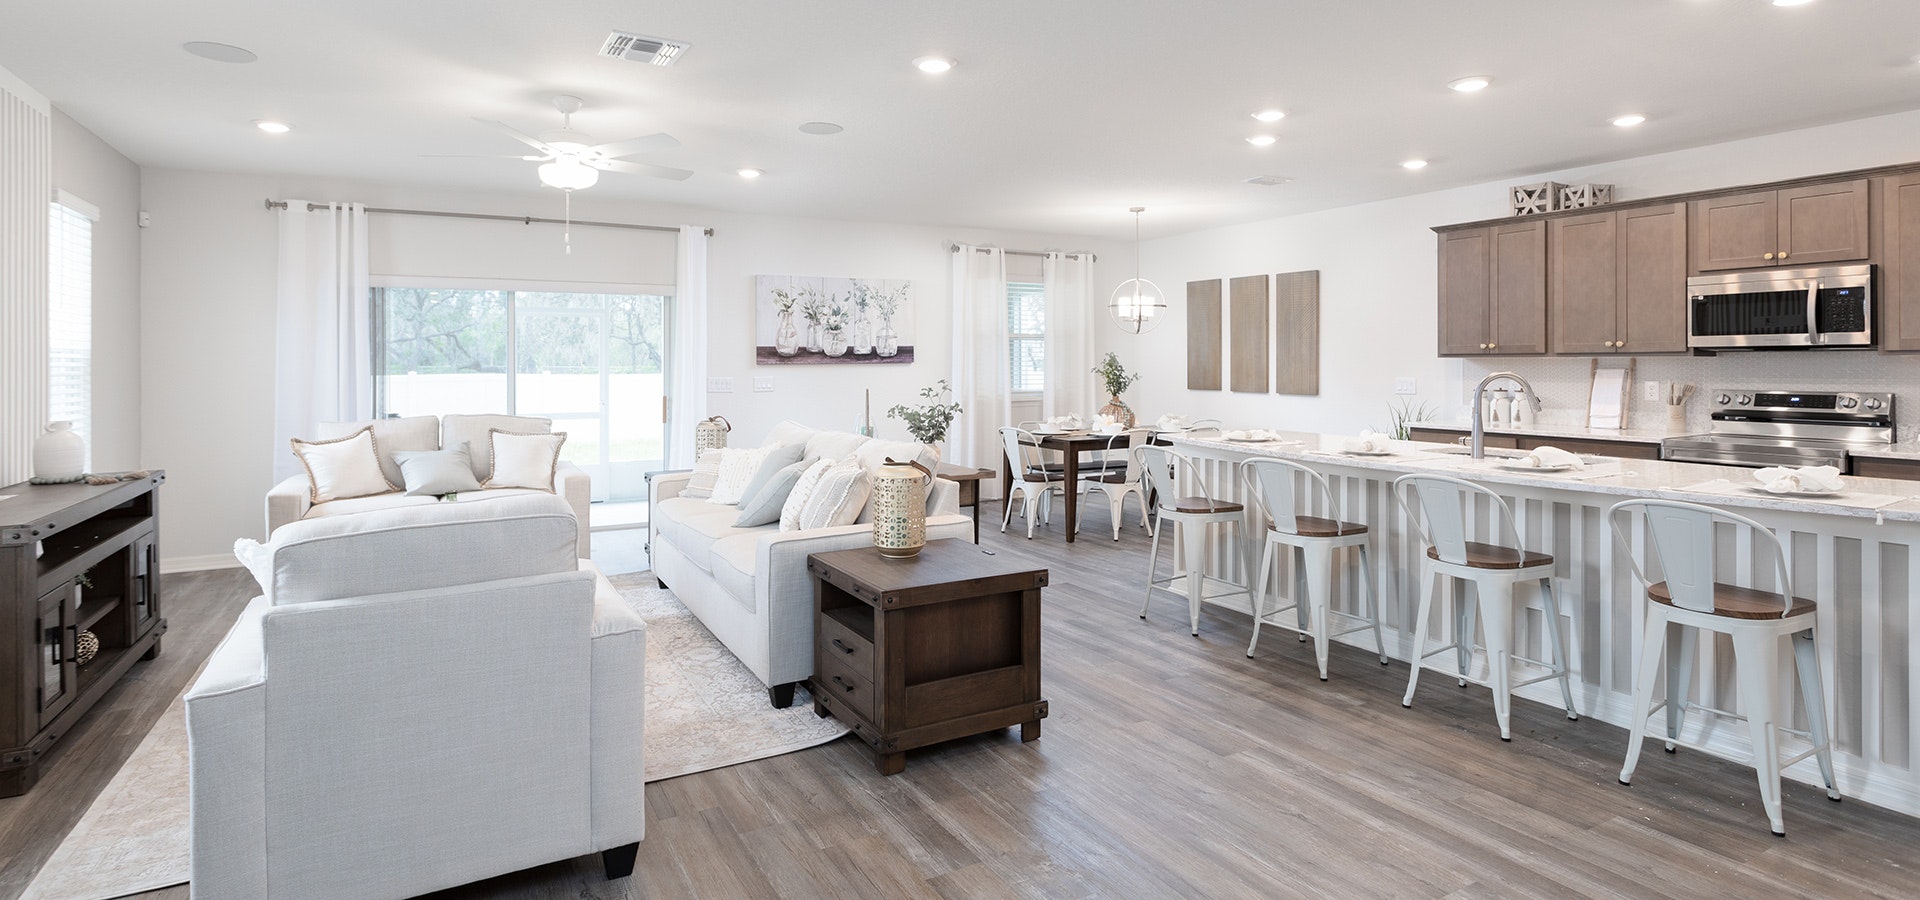 Homes are available now at Bennah Oaks, in Belleview, Florida